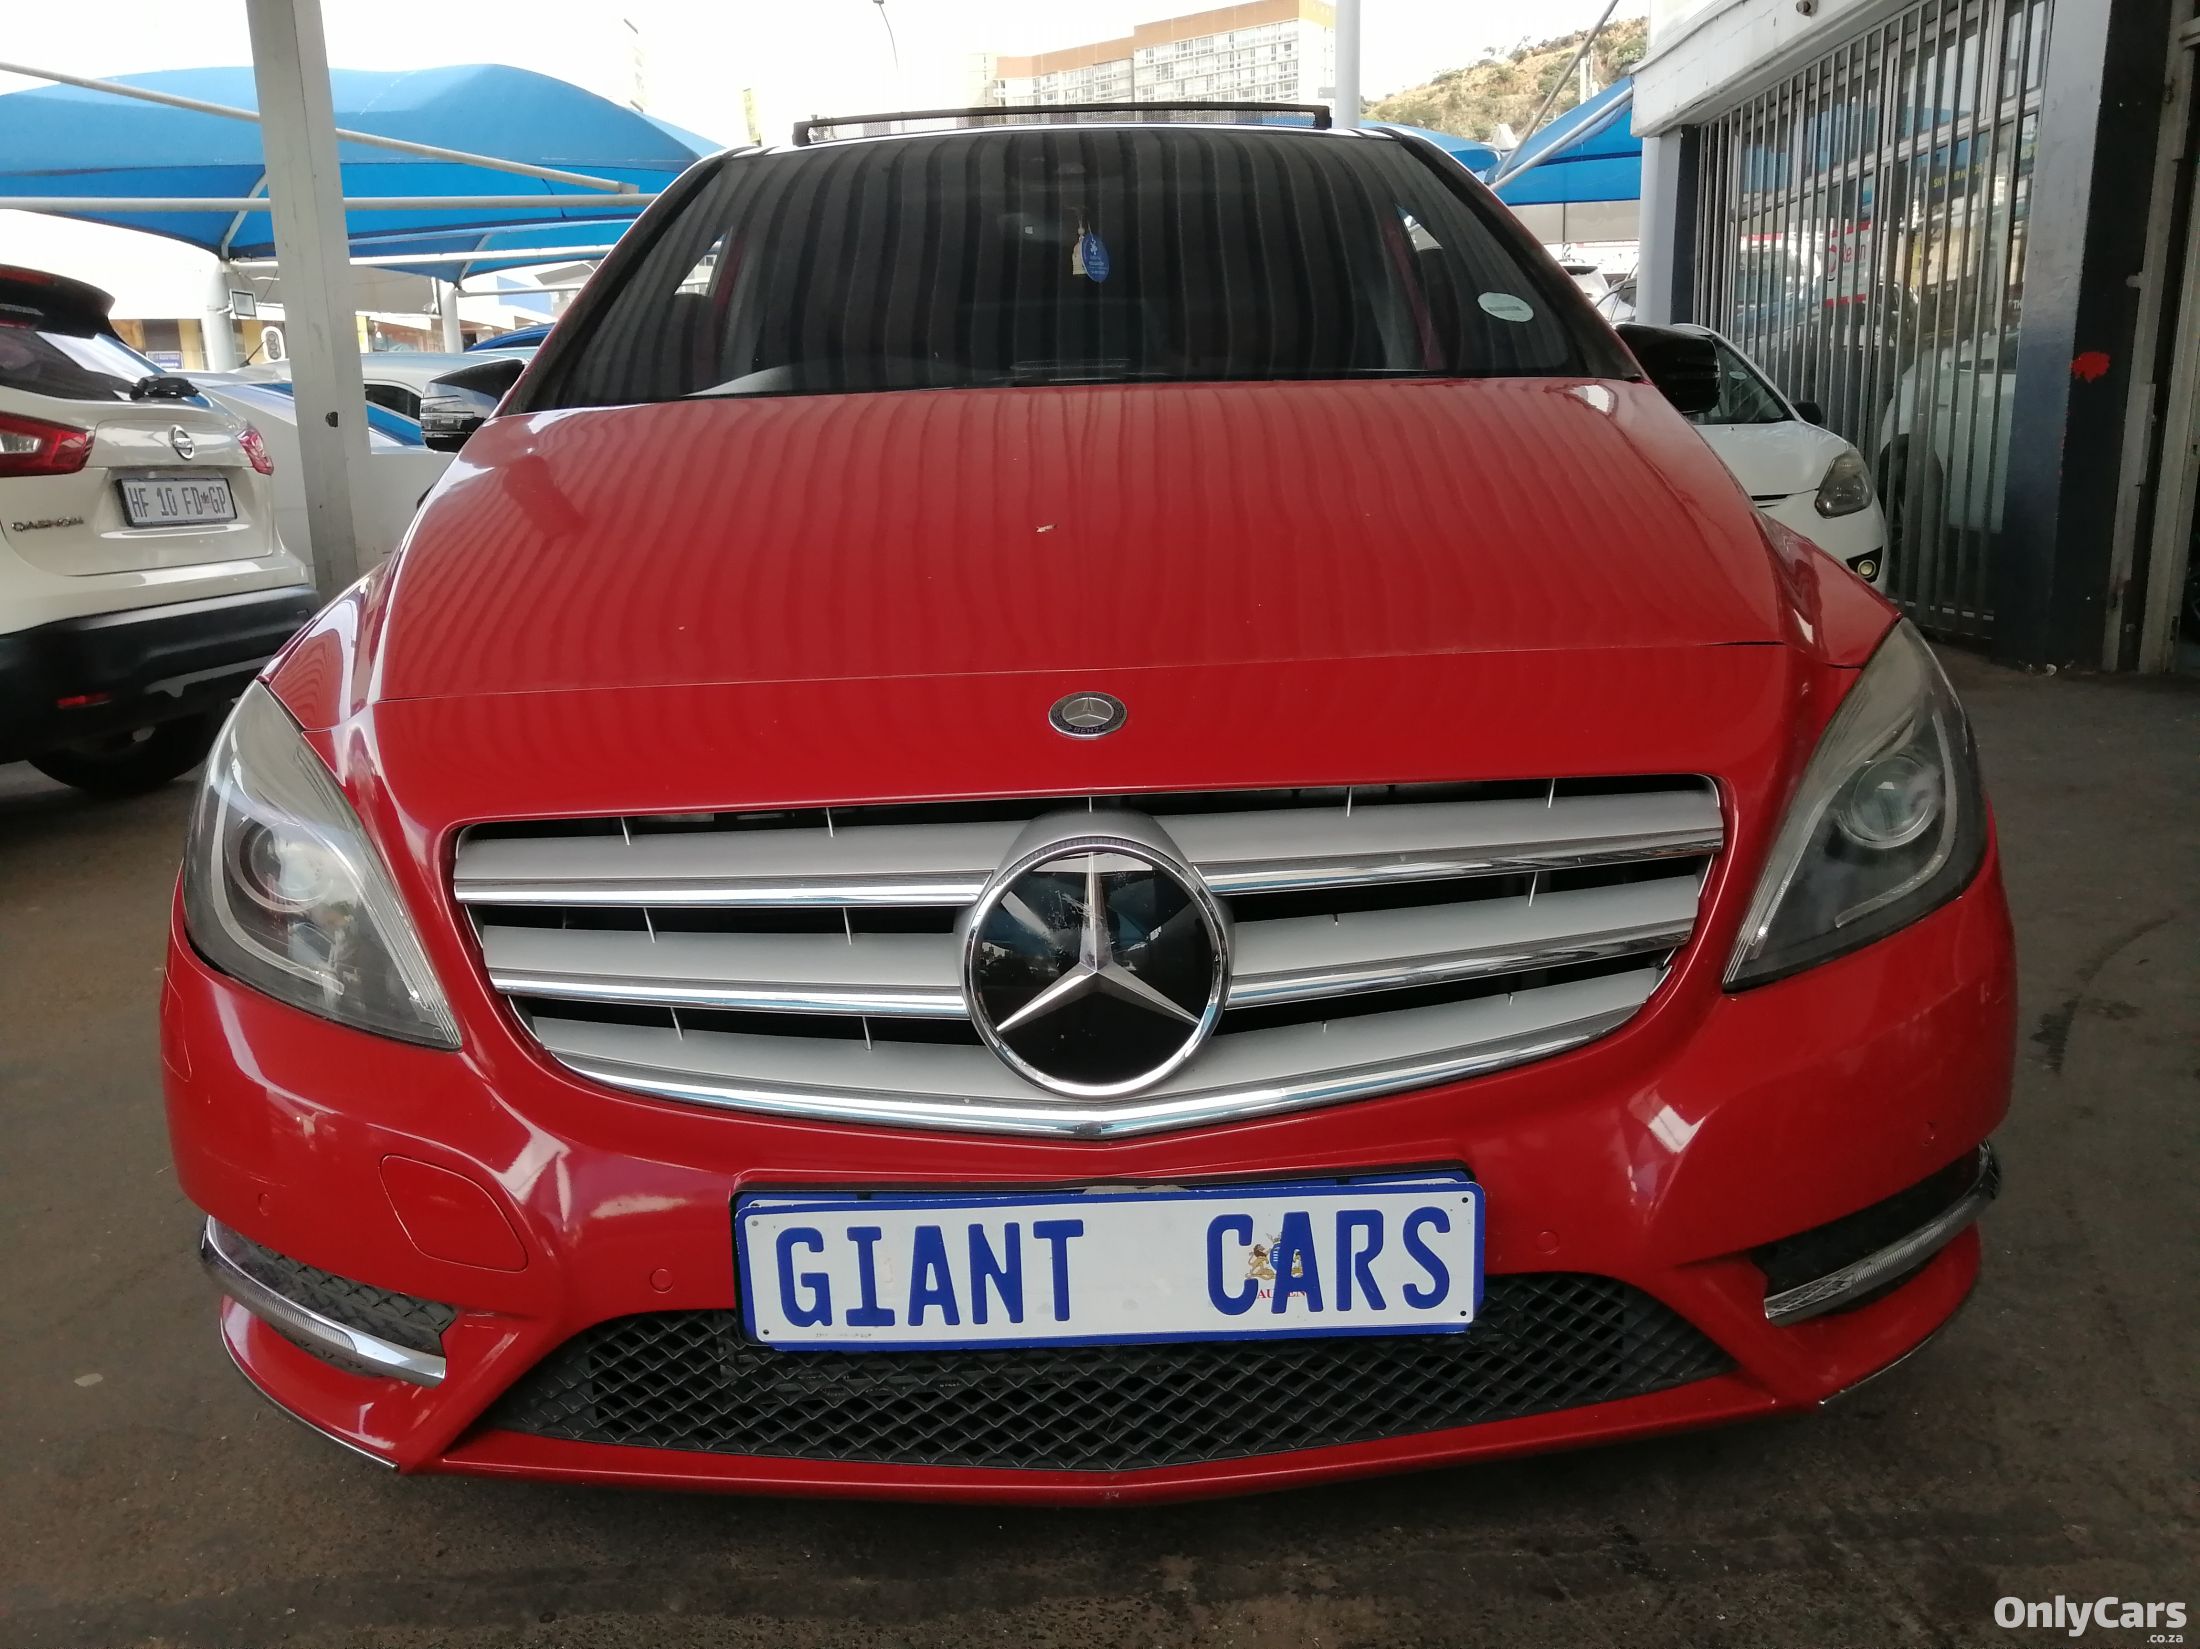 2014 Mercedes Benz B-Class B200 used car for sale in Johannesburg South Gauteng South Africa - OnlyCars.co.za